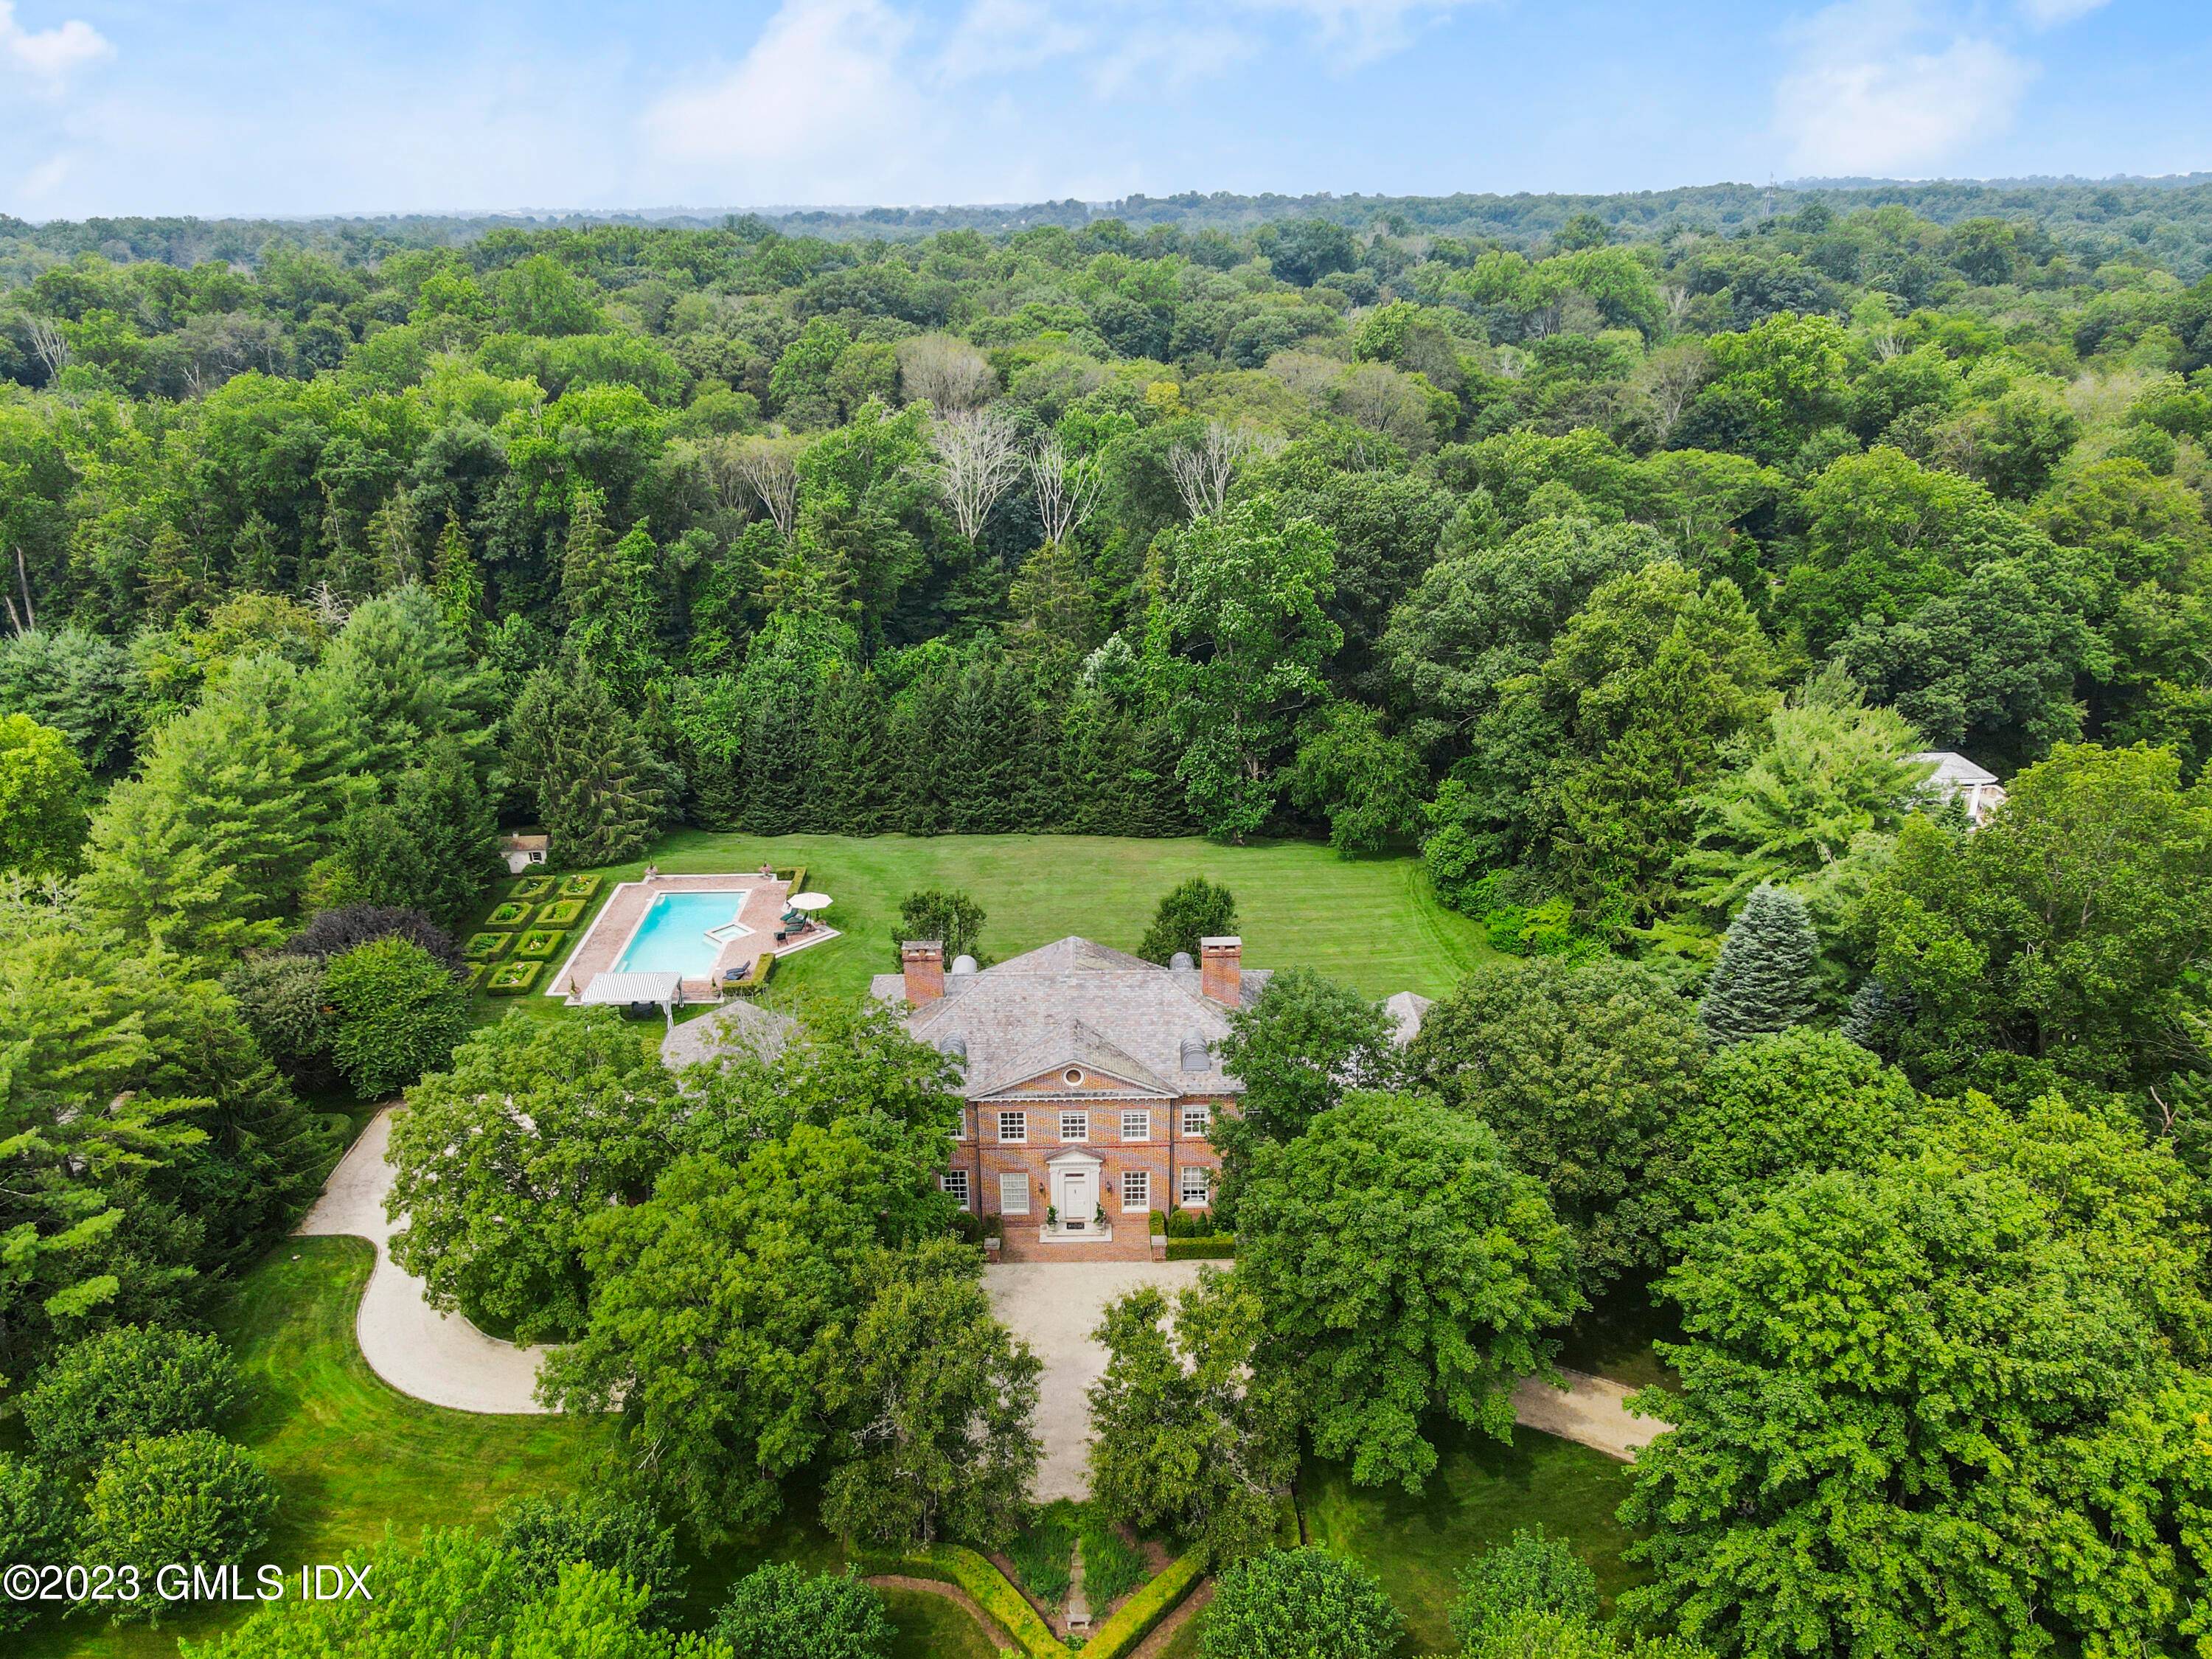 ANDREWS FARM This distinguished country estate overlooks 4 park like, level acres with a stunning pool and parterre gardens in an exclusive and gated private association.